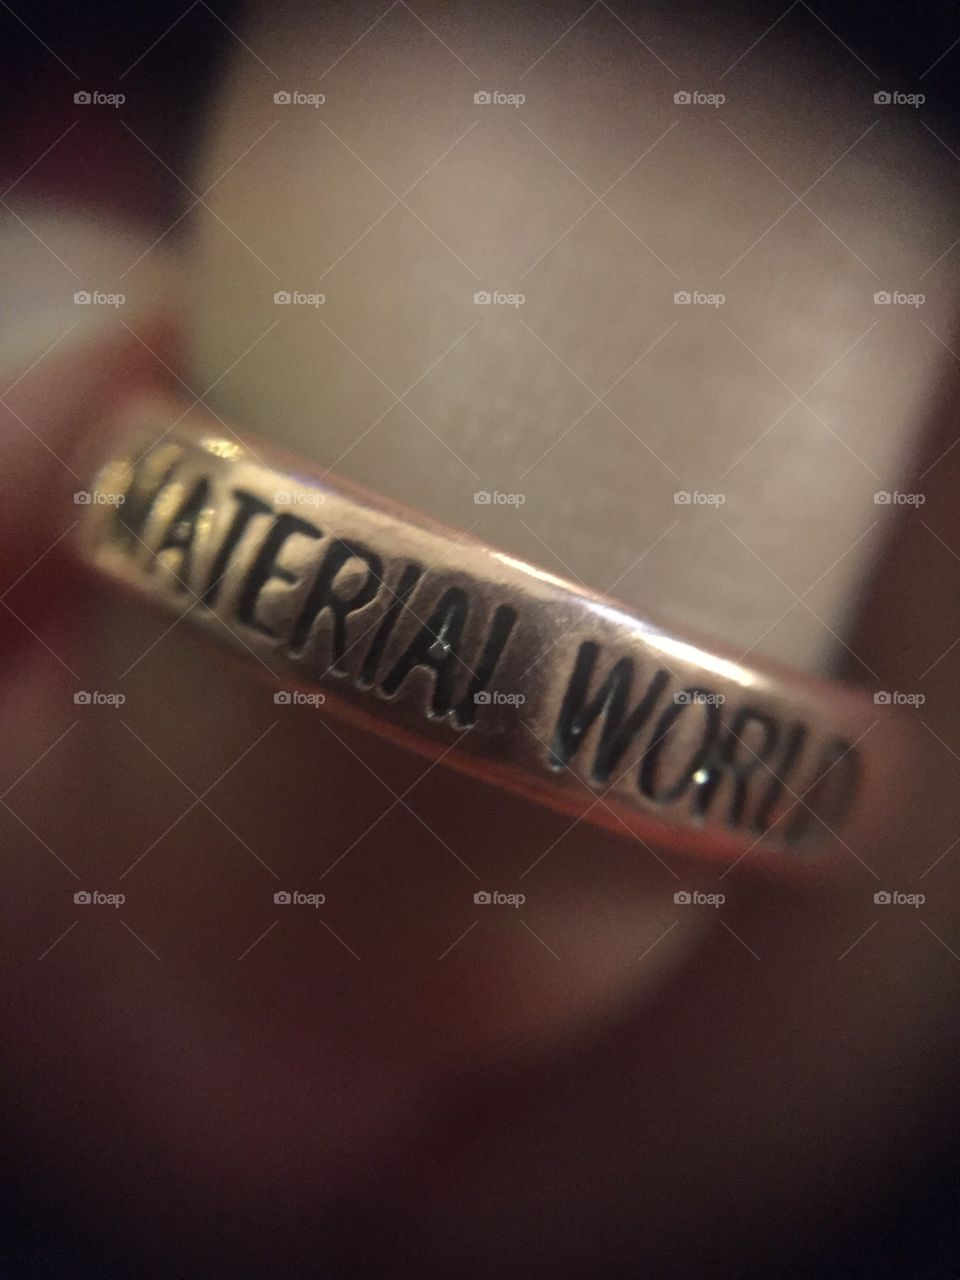 This is a macro shot of one of my favorite rings. It says "We Are Living A Material World," probably inspired by the popular Madonna song "Material Girl."